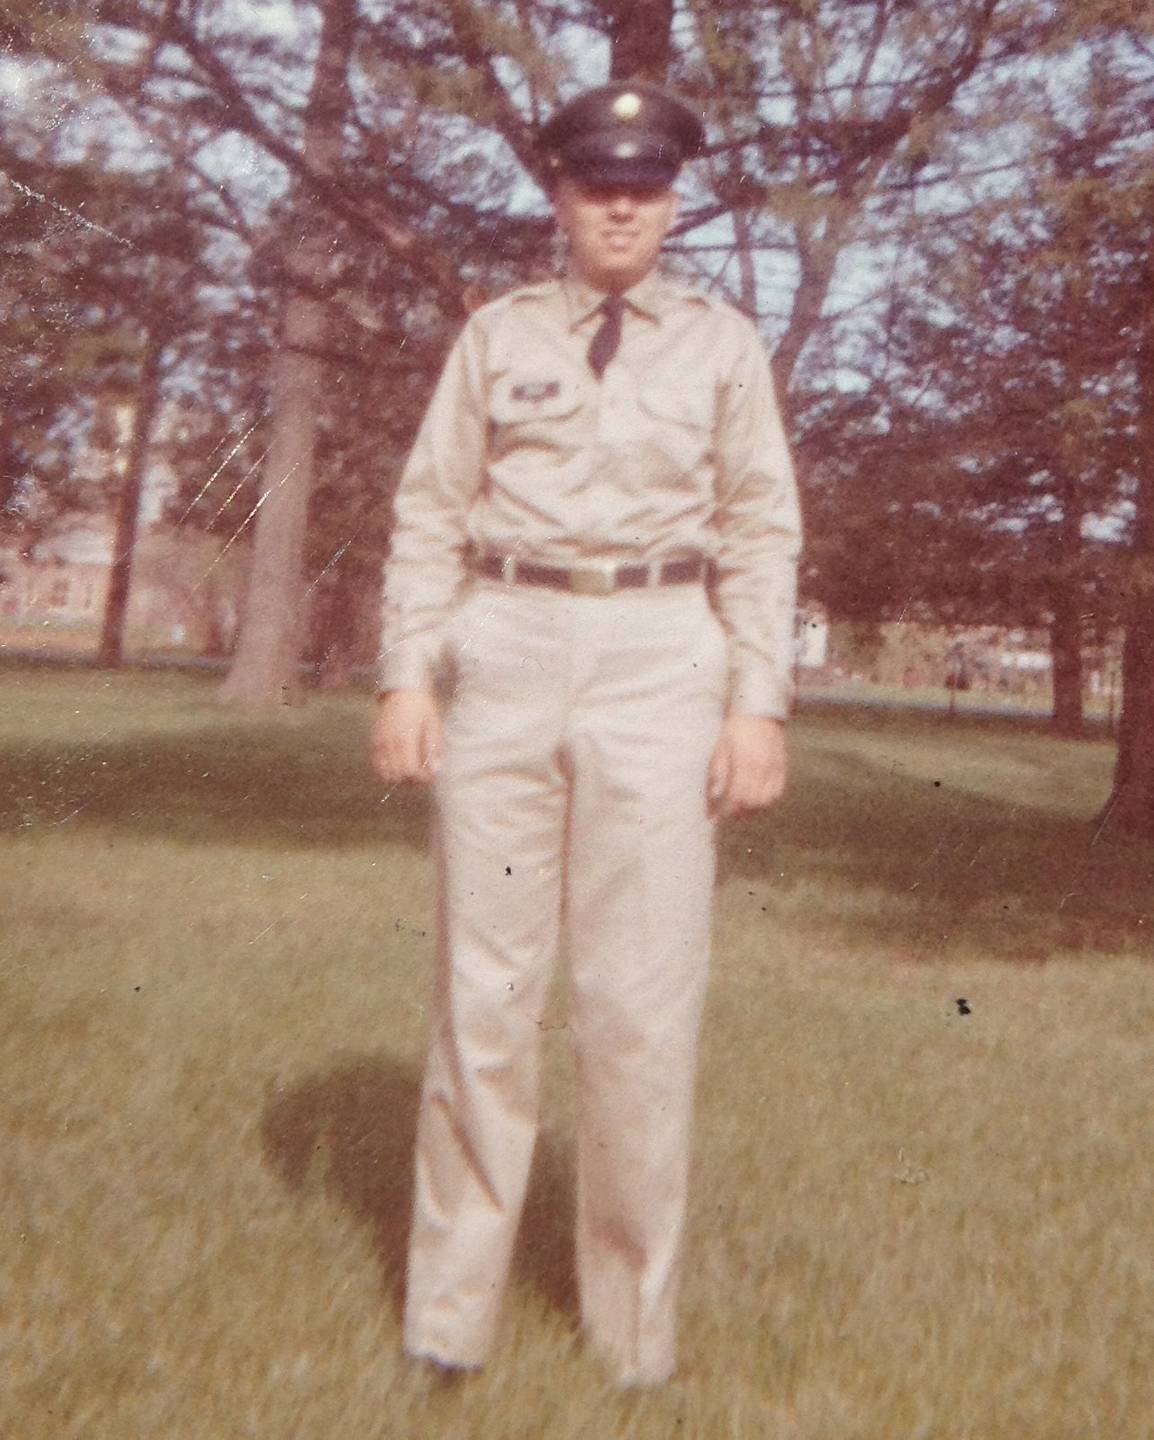 Young U.S. soldier in uniform, with hat, standing in a field of grass and trees.